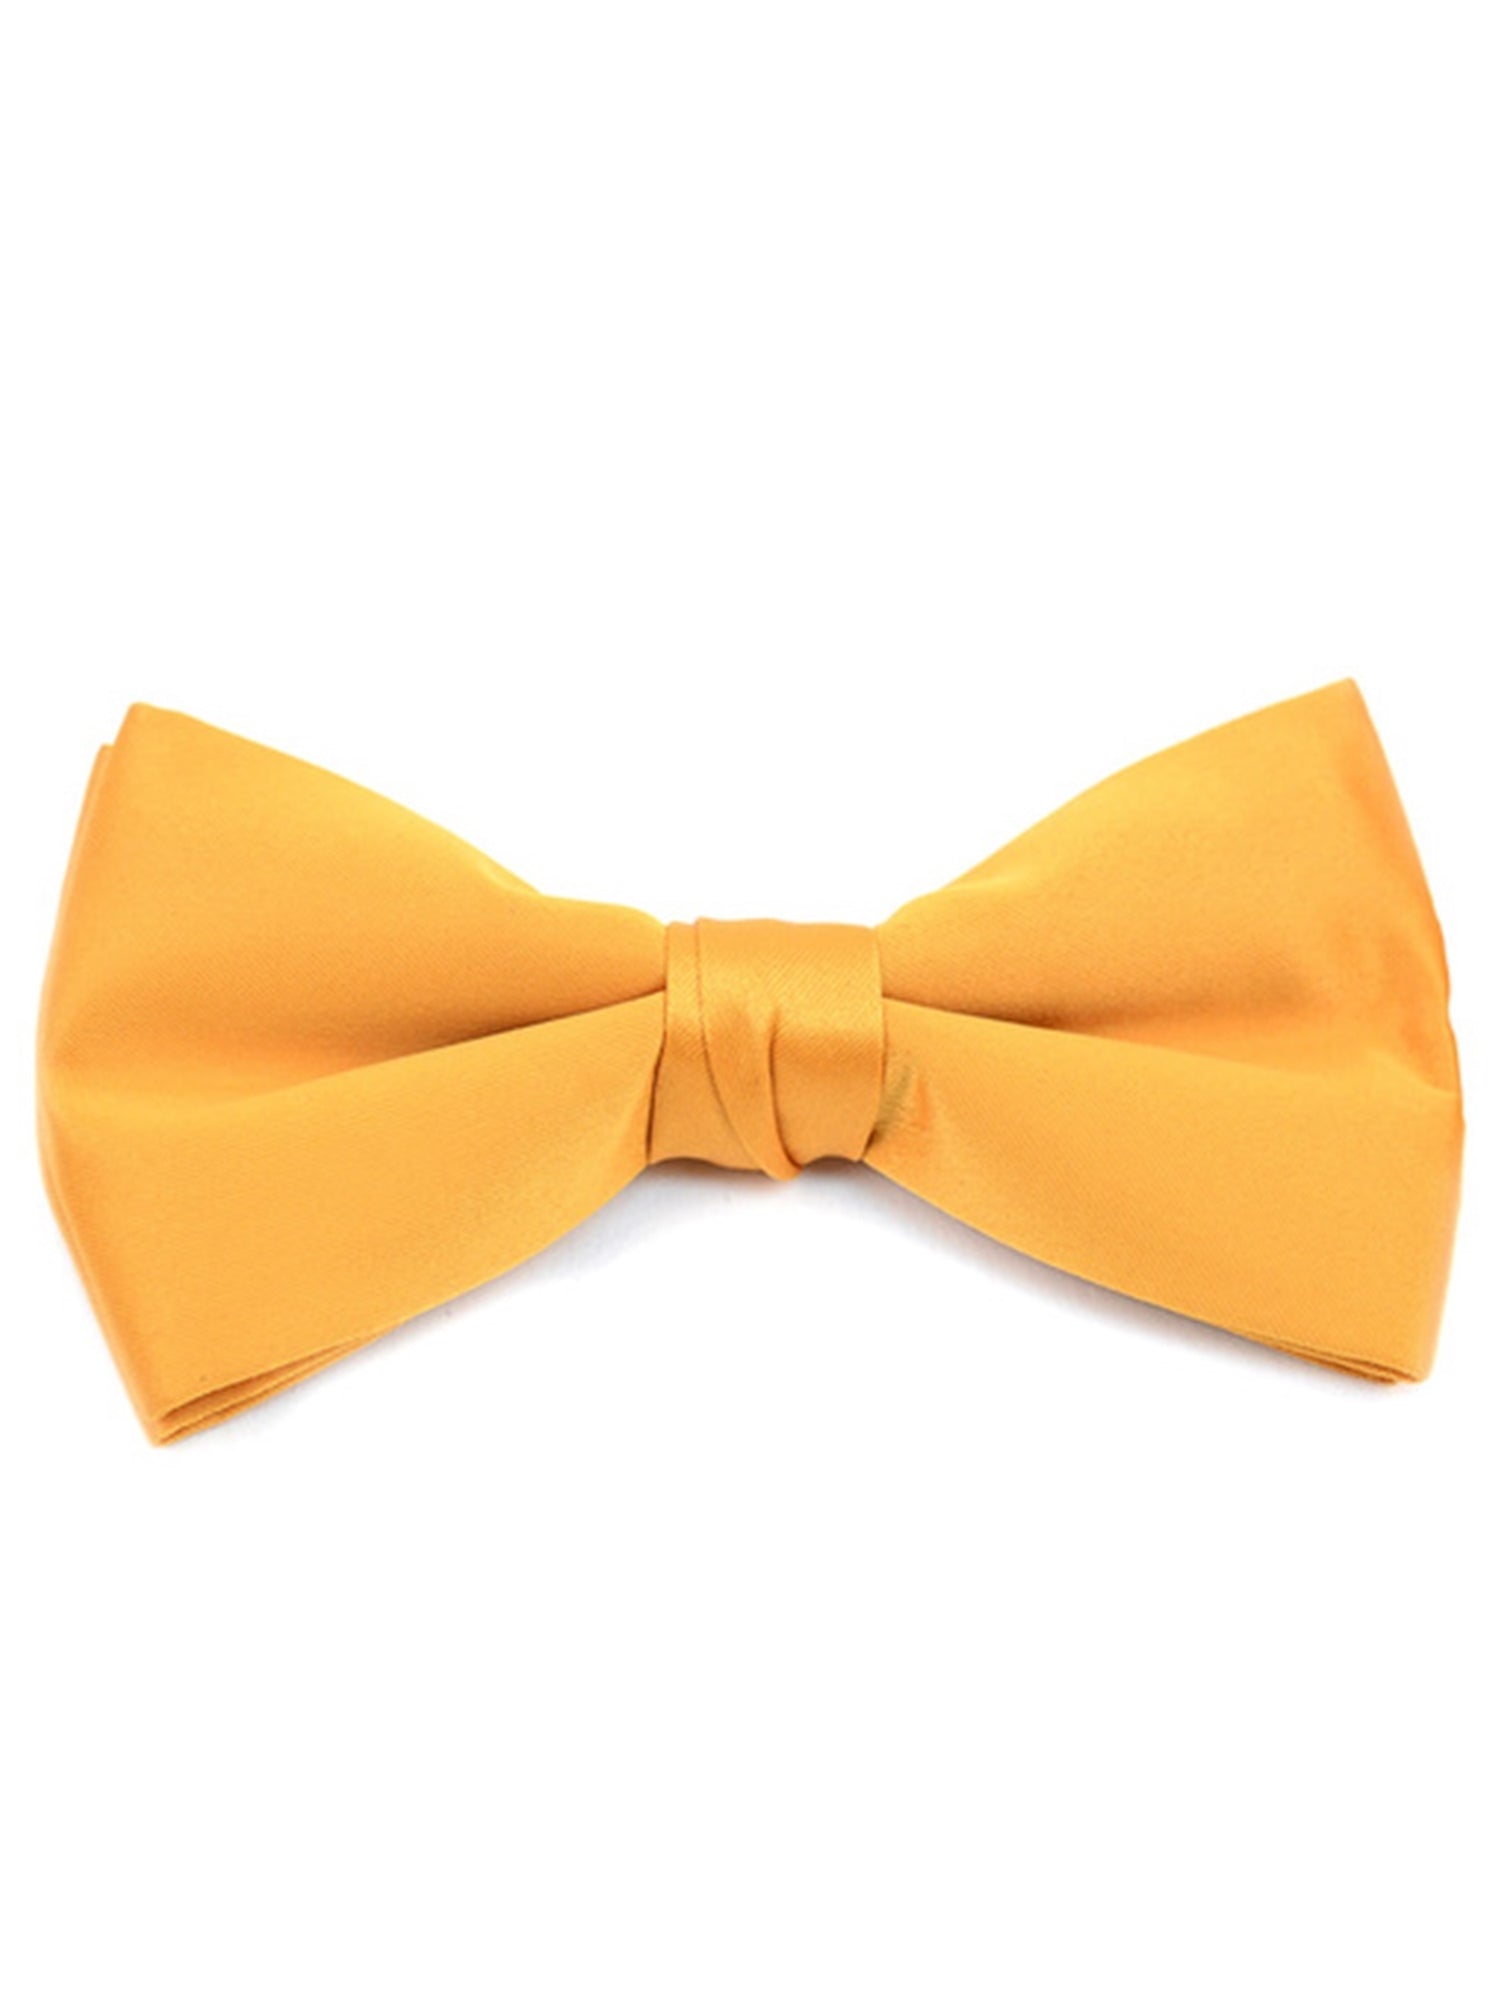 Young Boy's Pre-tied Clip On Bow Tie - Formal Tuxedo Solid Color Boy's Solid Color Bow Tie TheDapperTie Gold One Size 